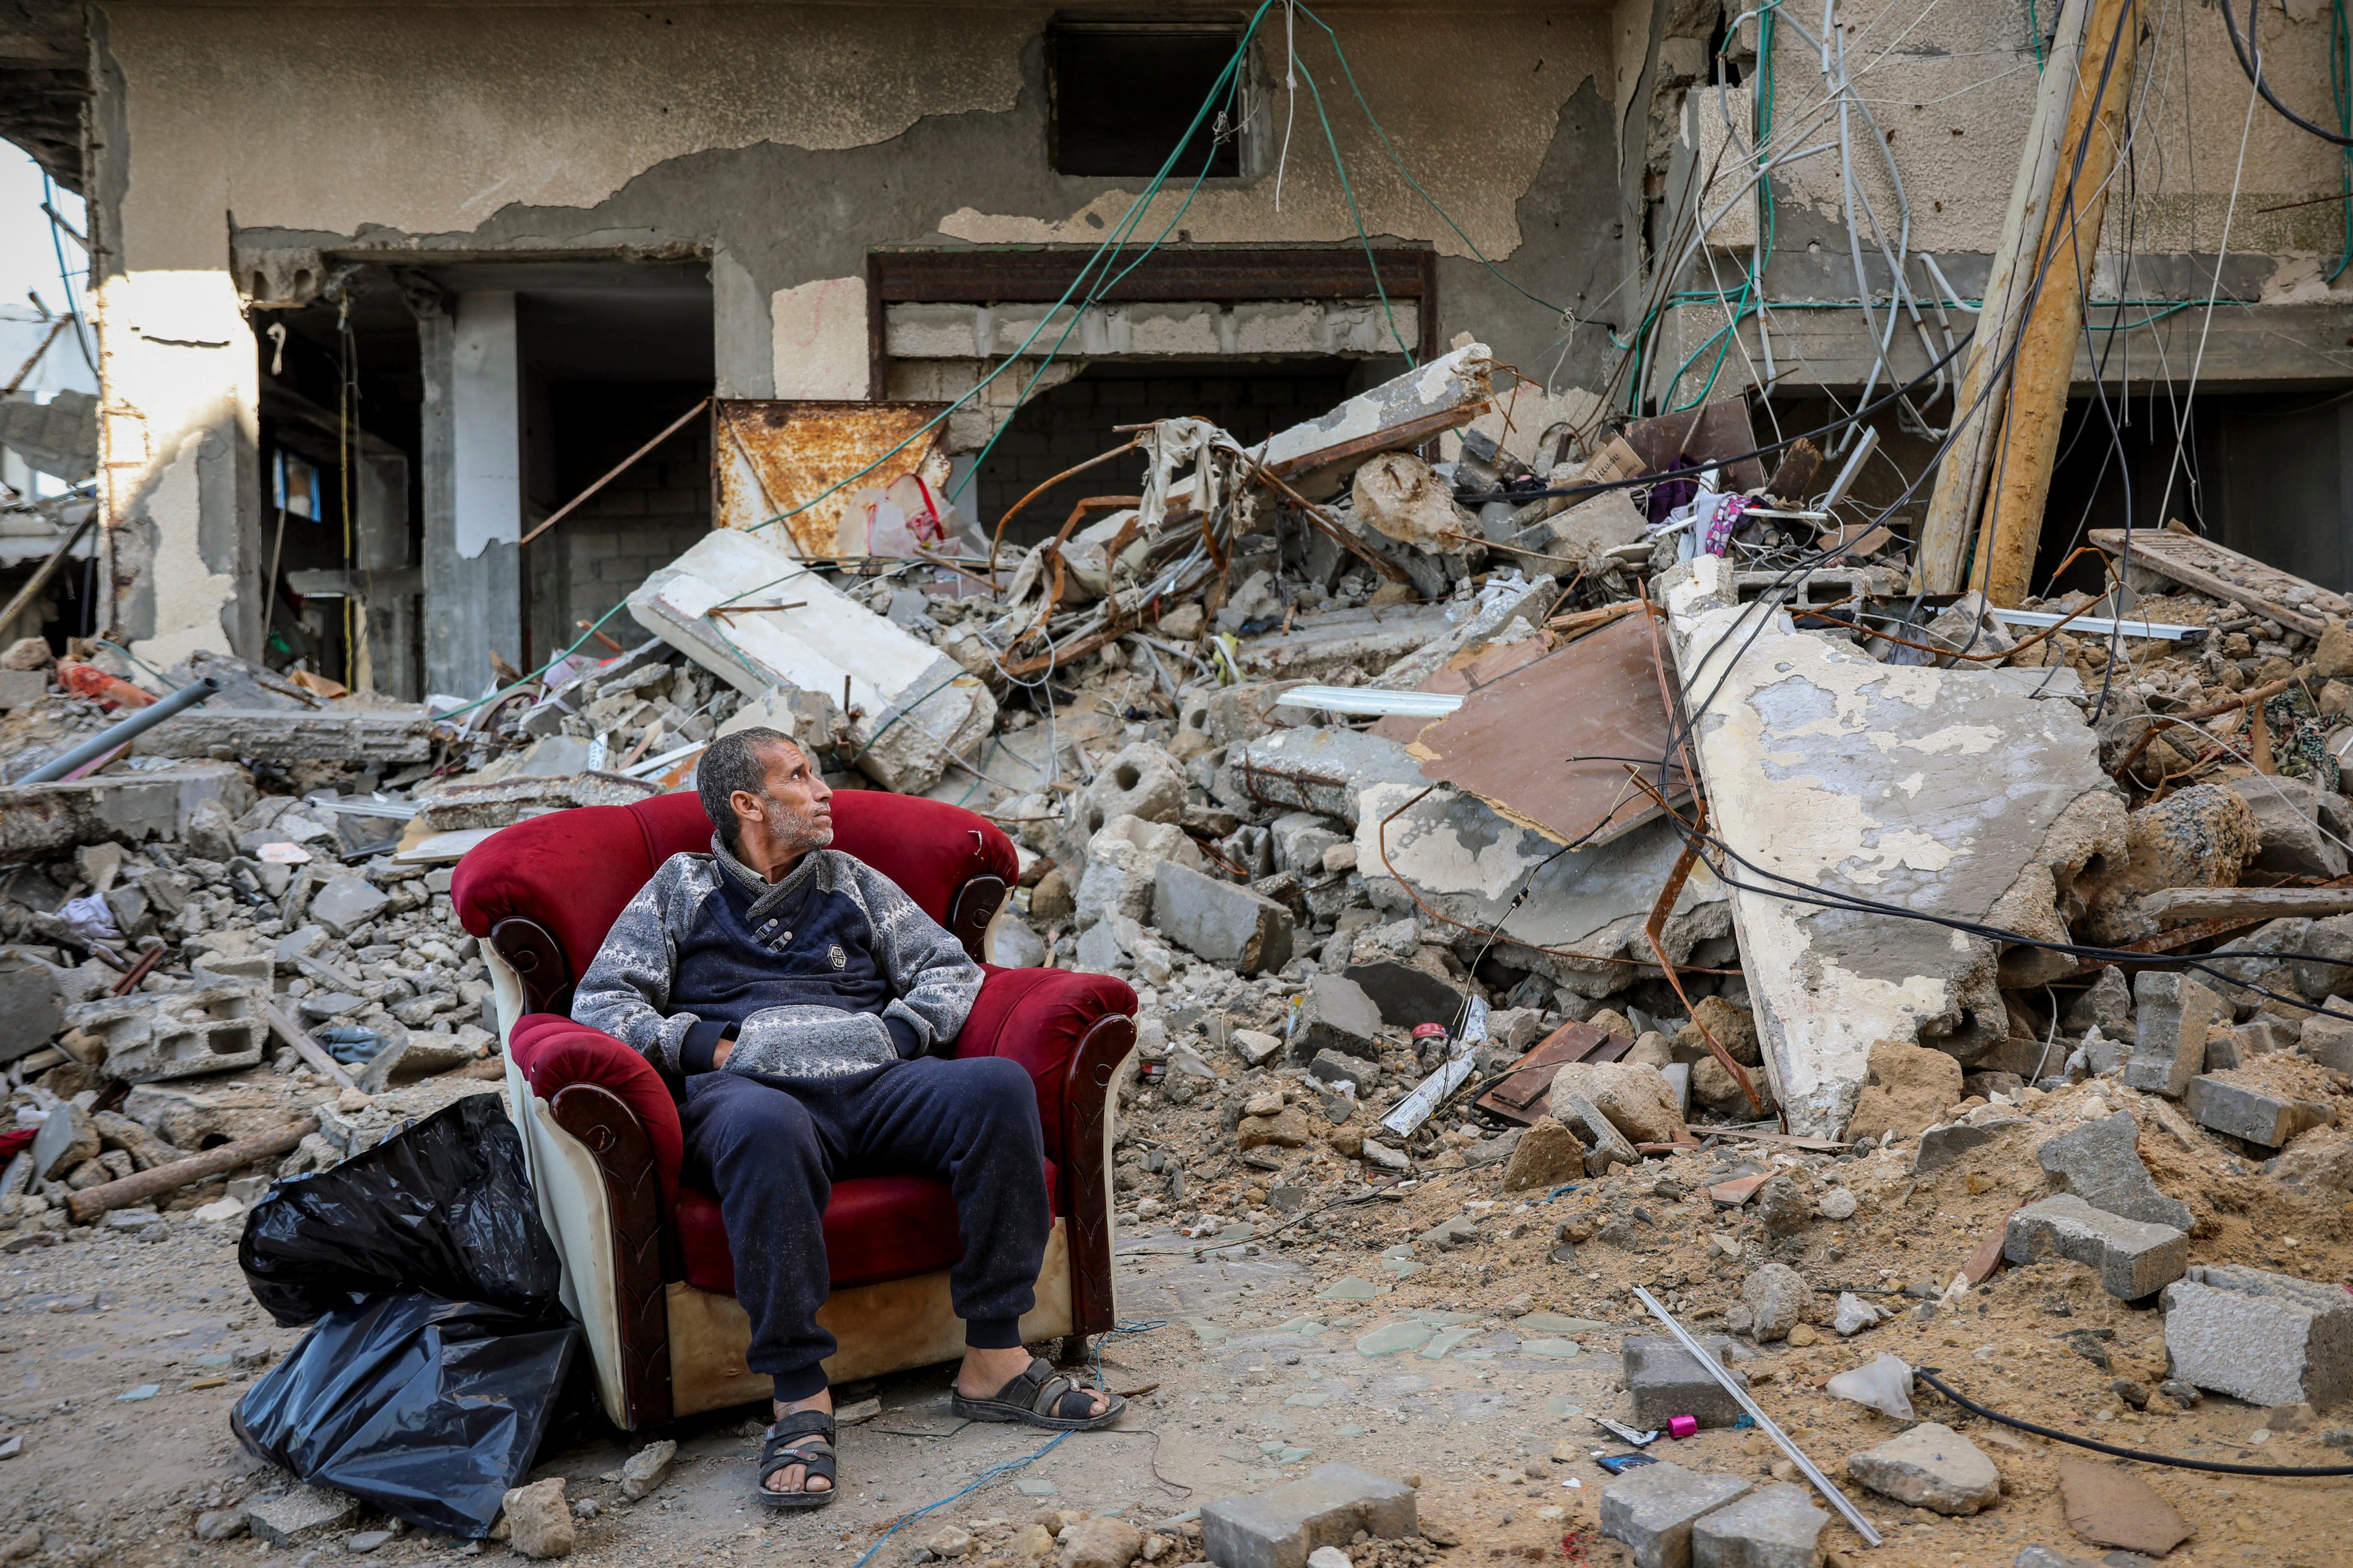 A Palestinian man sits in an armchair outside a destroyed building in Gaza City on Wednesday, the sixth day of the temporary truce between Hamas and Israel. Photo: AP